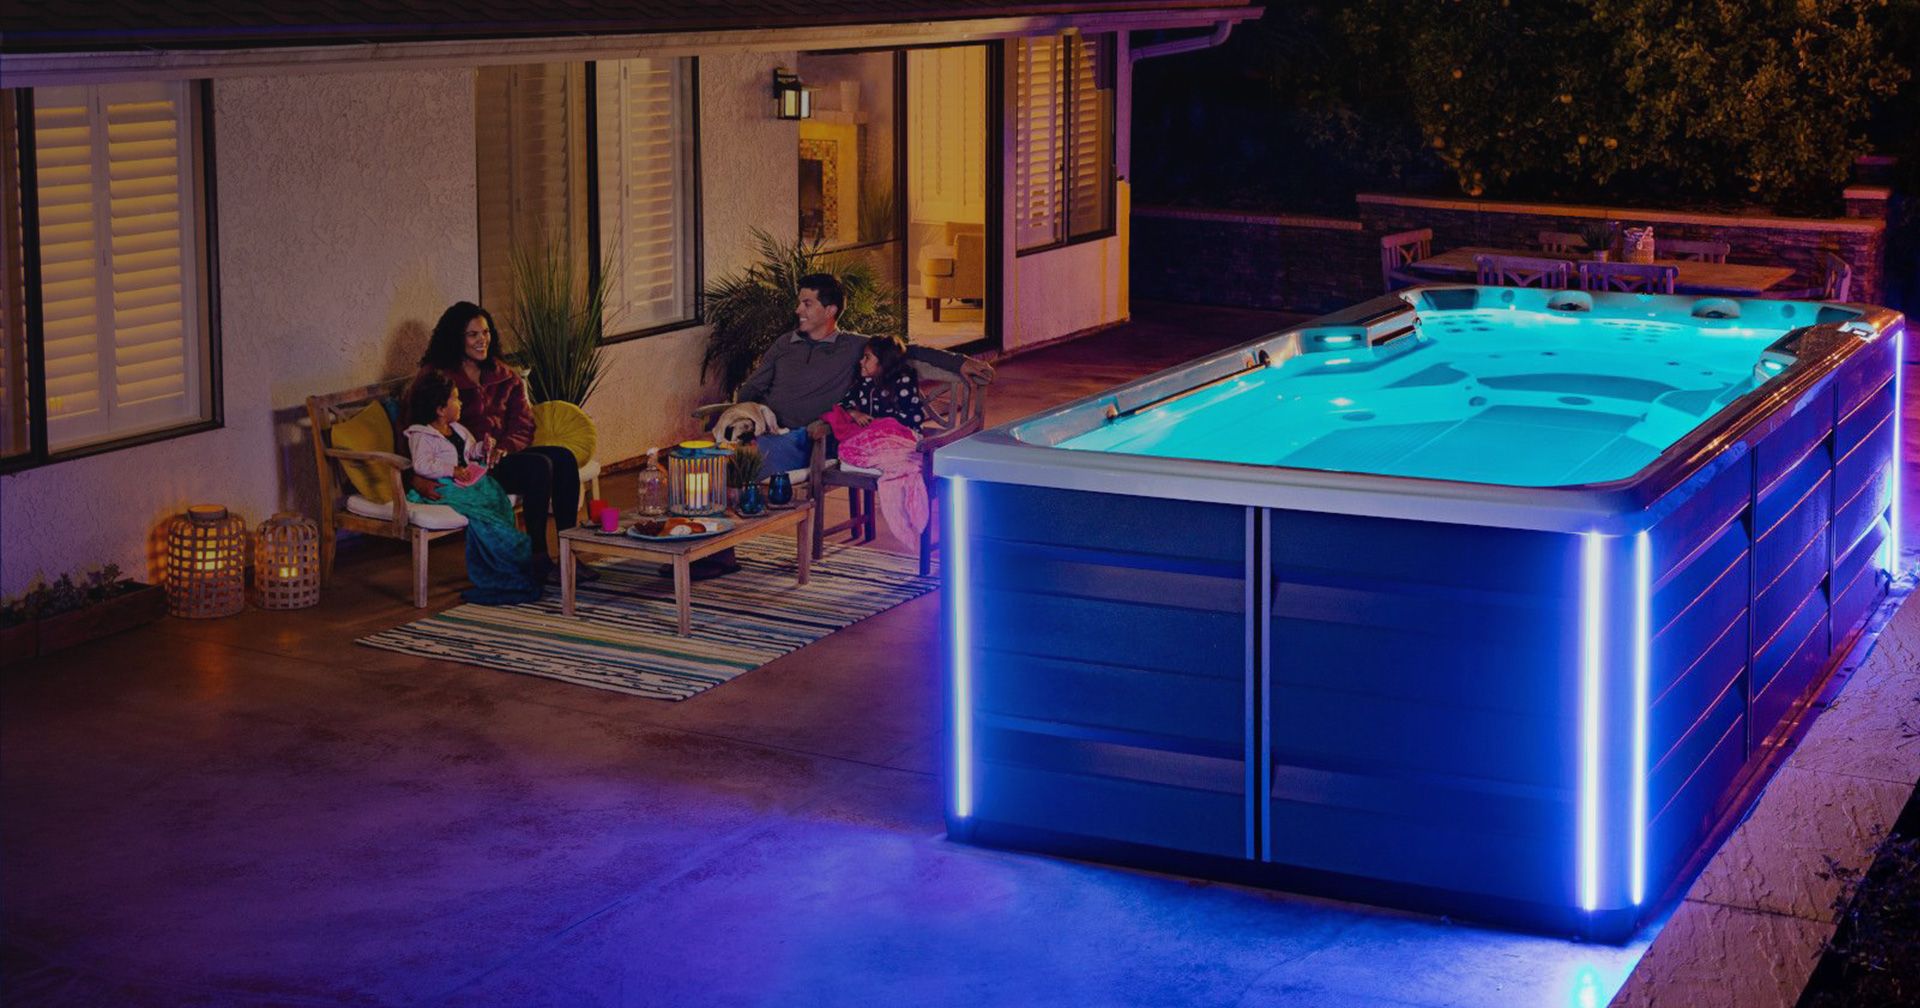 What Is The Biggest Hot Tub You Can Buy